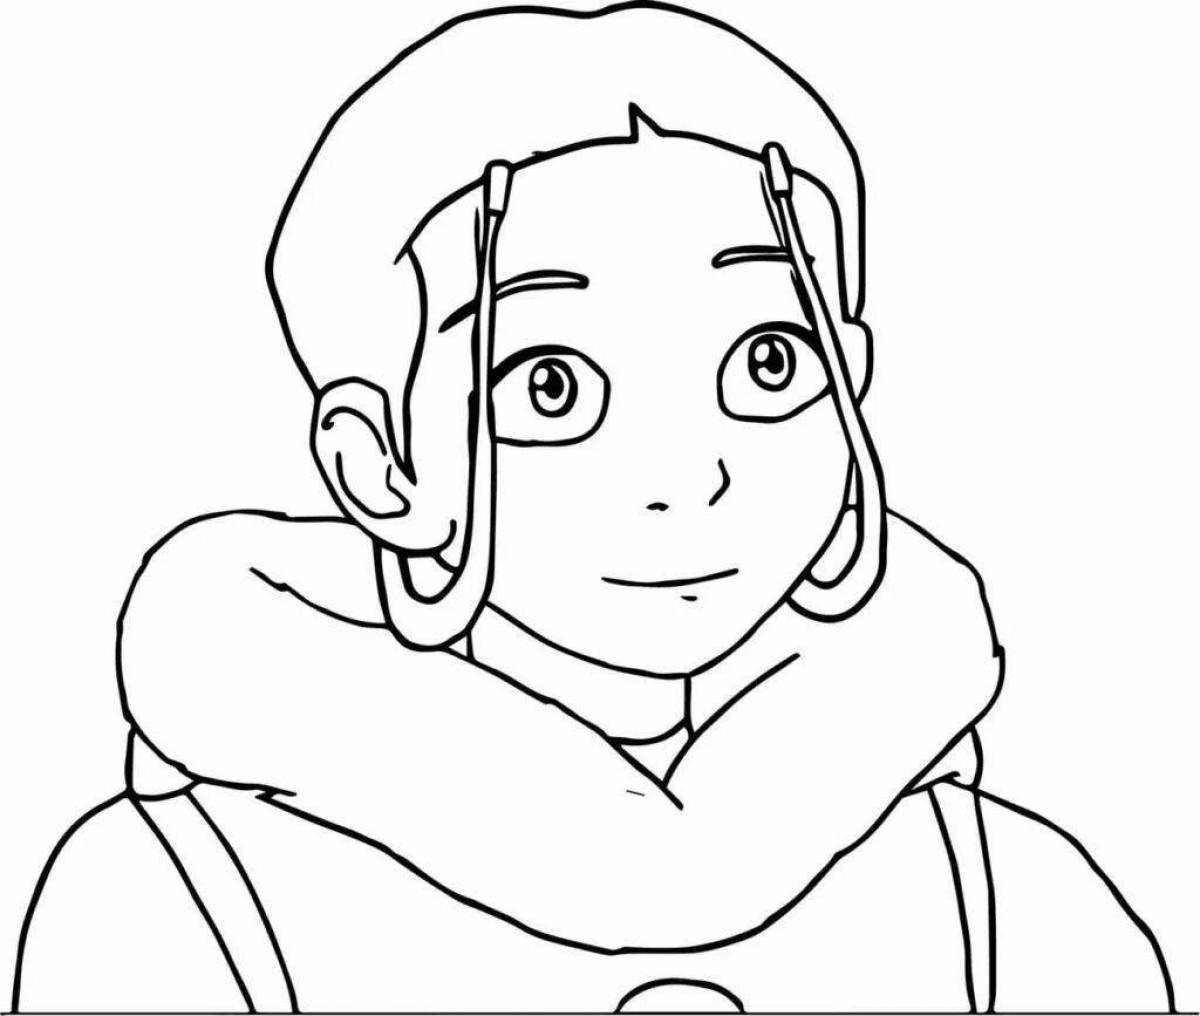 Exquisite Avatar: The Last Airbender Coloring Page